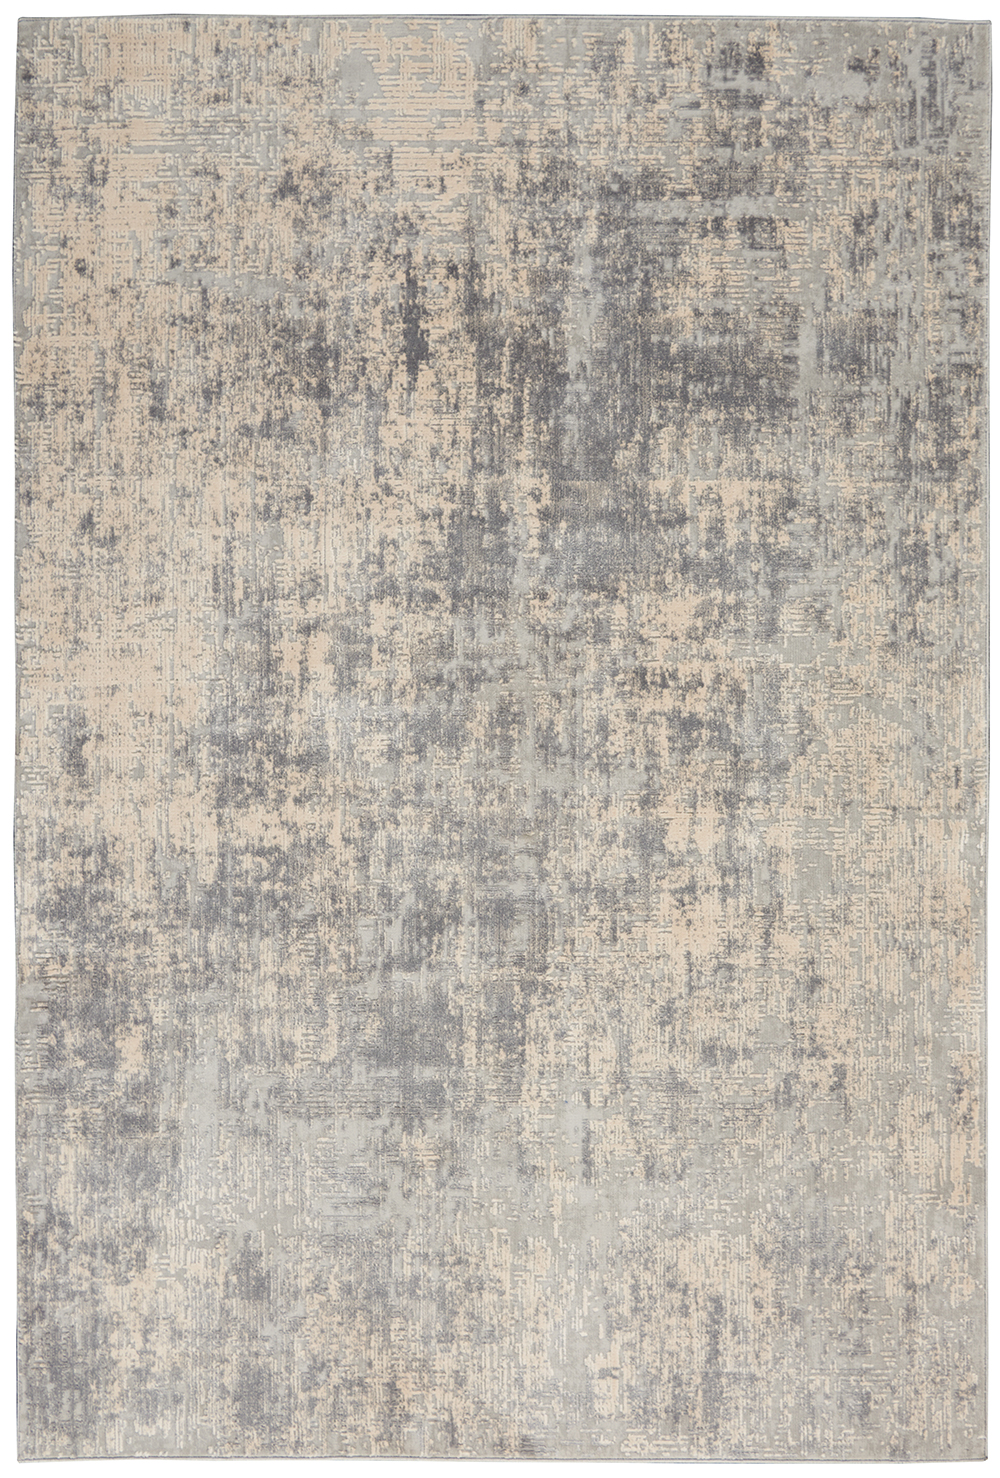 Nourison Rugs - Rustic Textures Rectanglular RUS01 Rug in Ivory / Silver - 1.8m x 1.2m